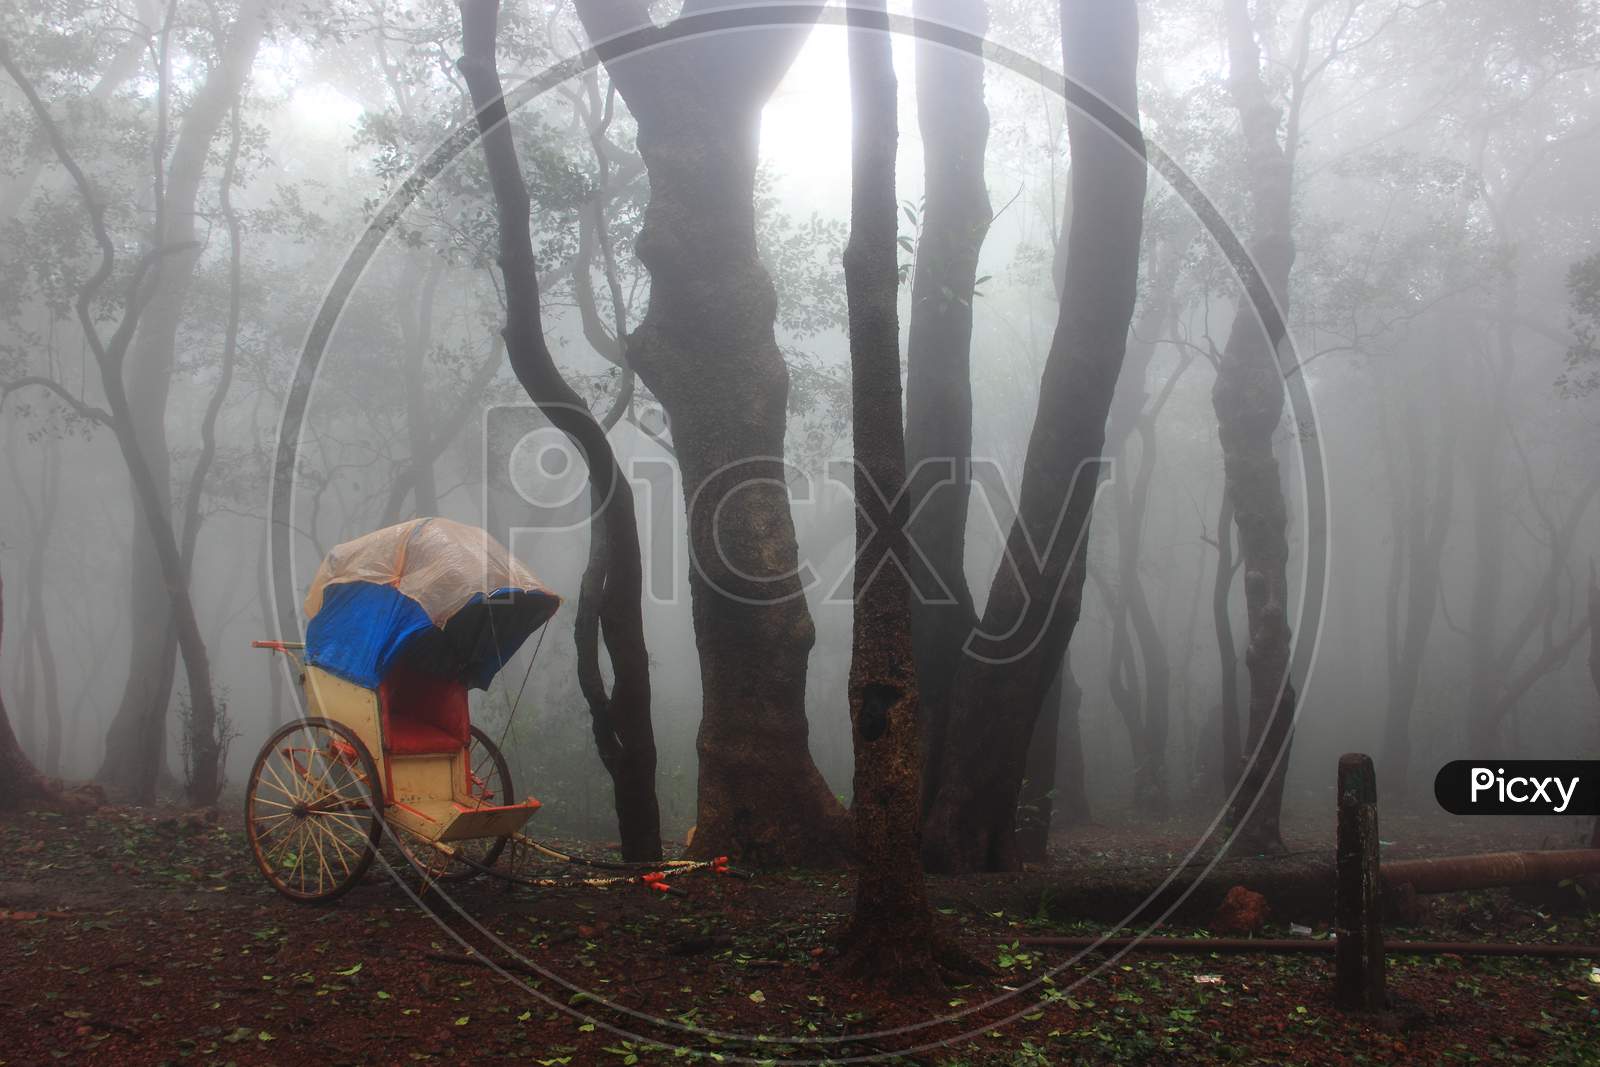 Matheran, Hill station in India with fog